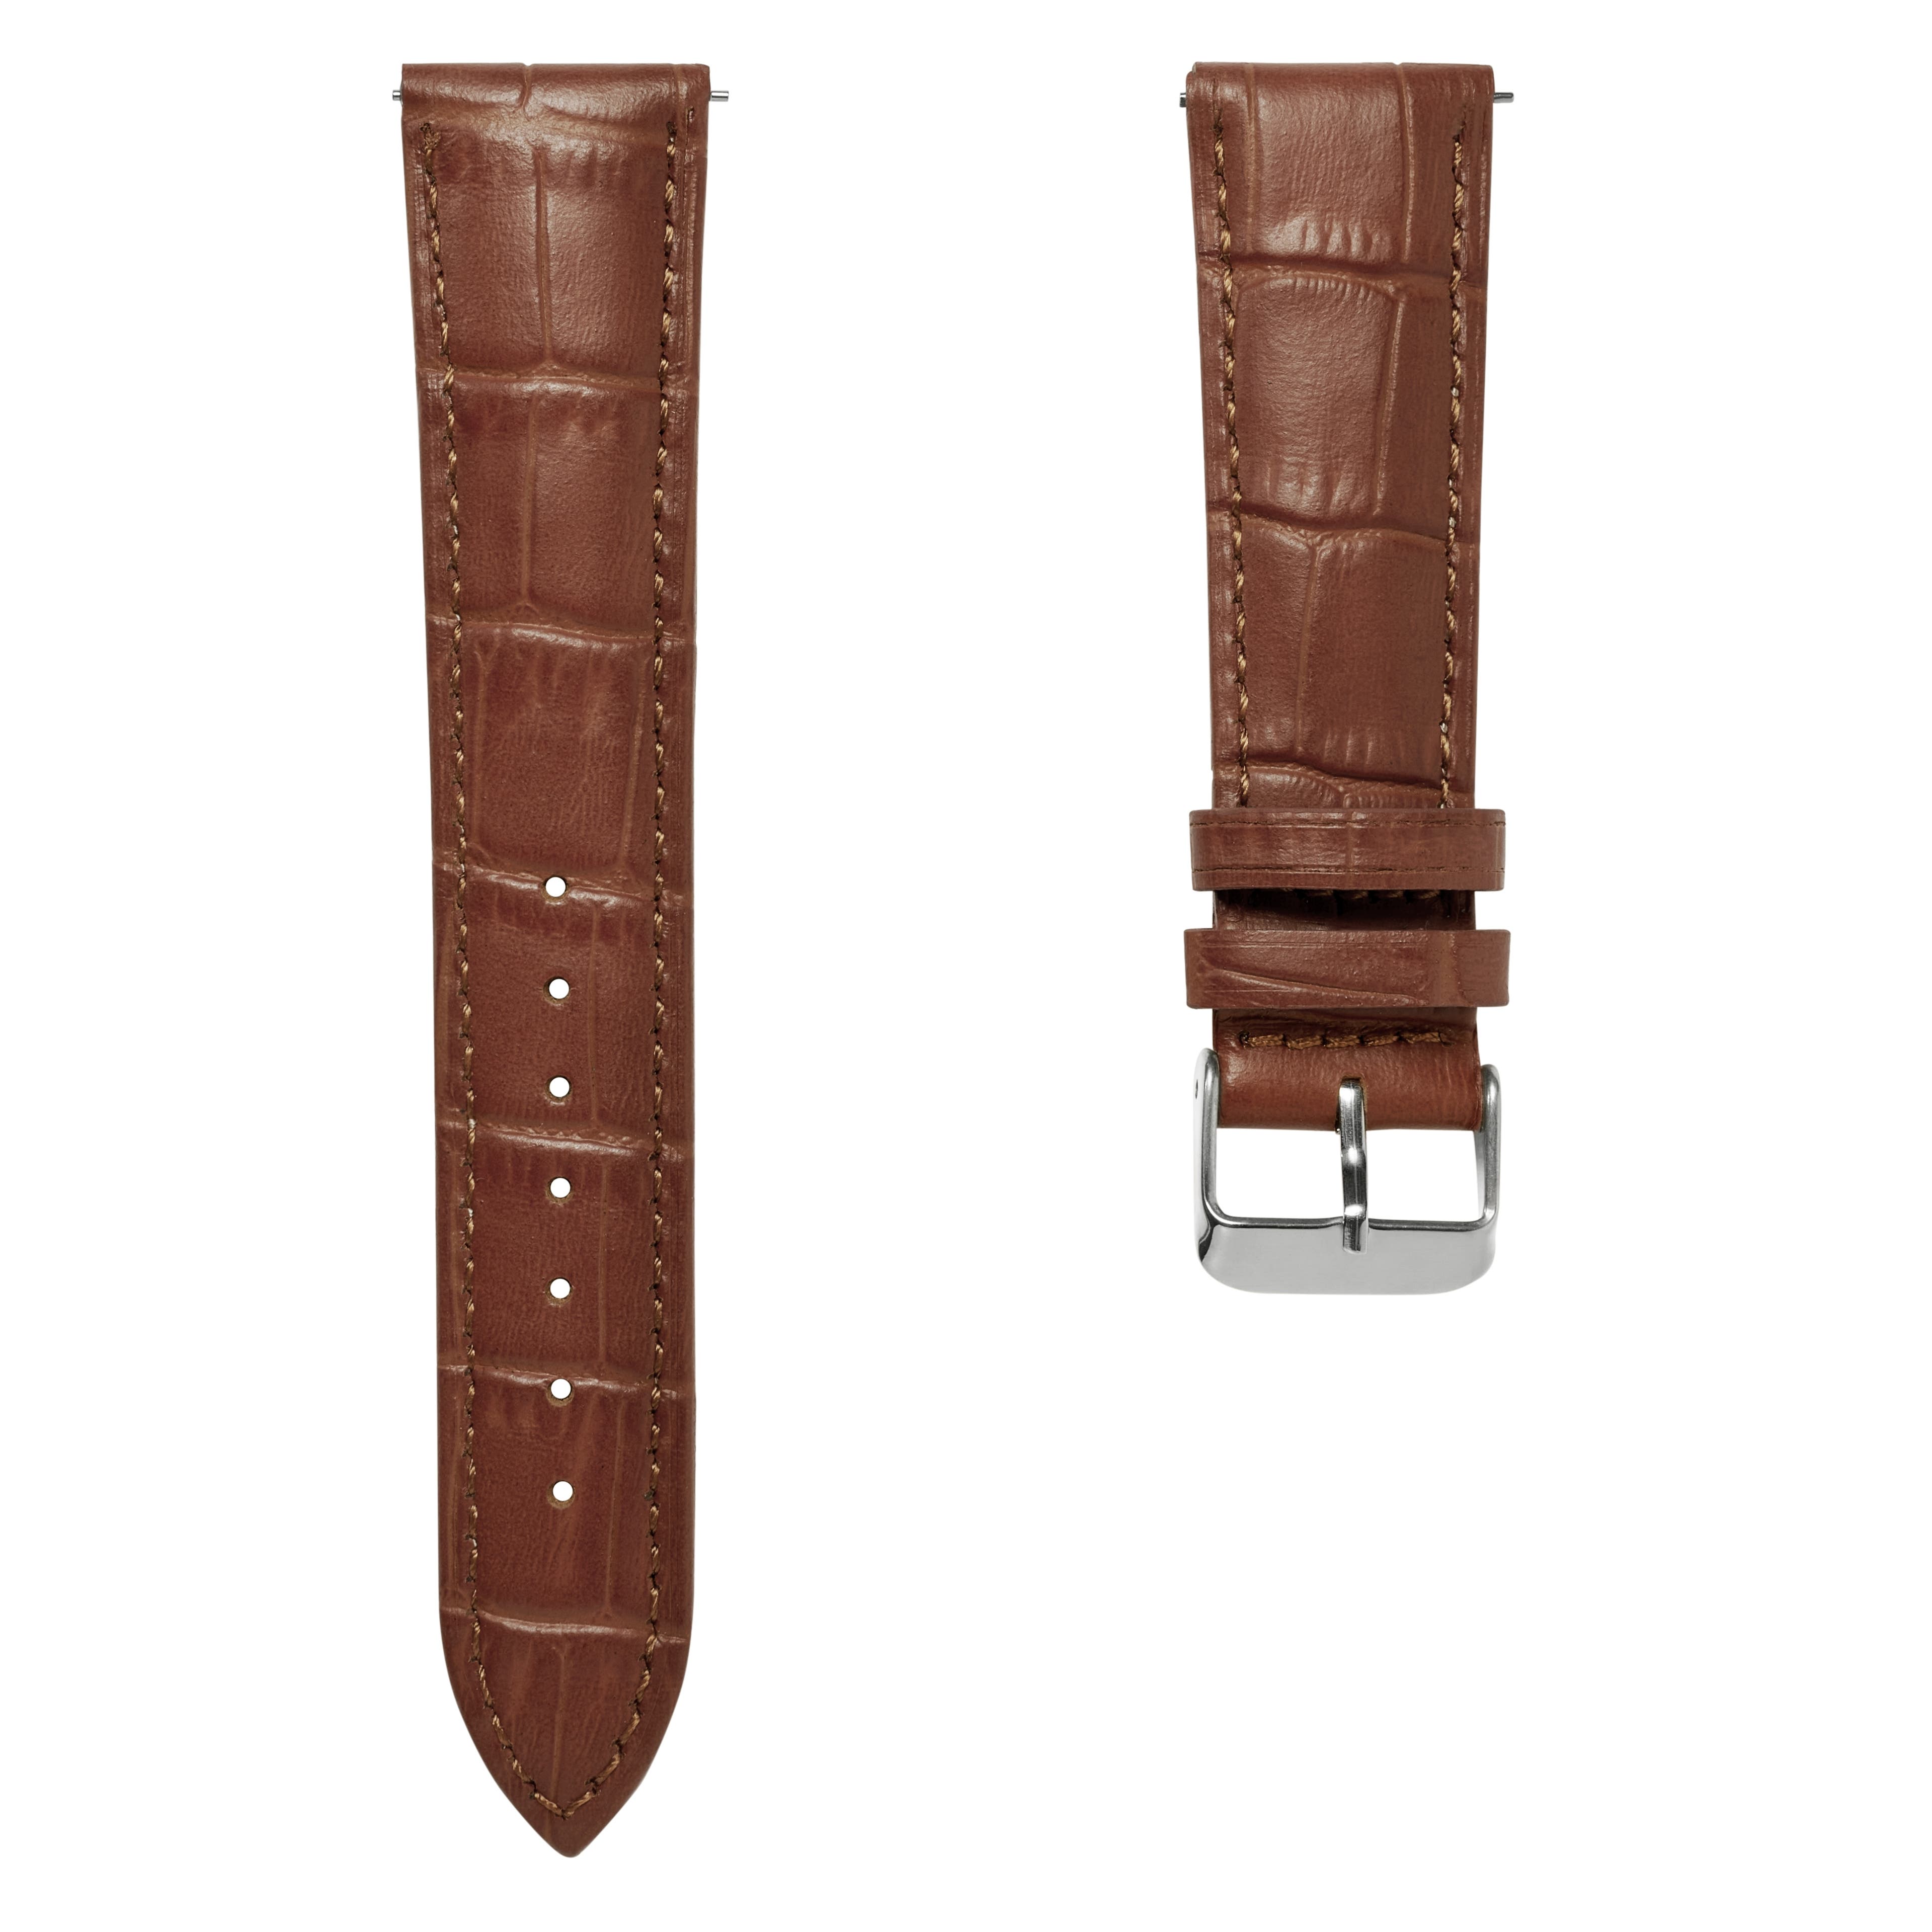 22 mm Crocodile-Embossed Tan Leather Watch Strap with Silver-Tone Buckle – Quick Release